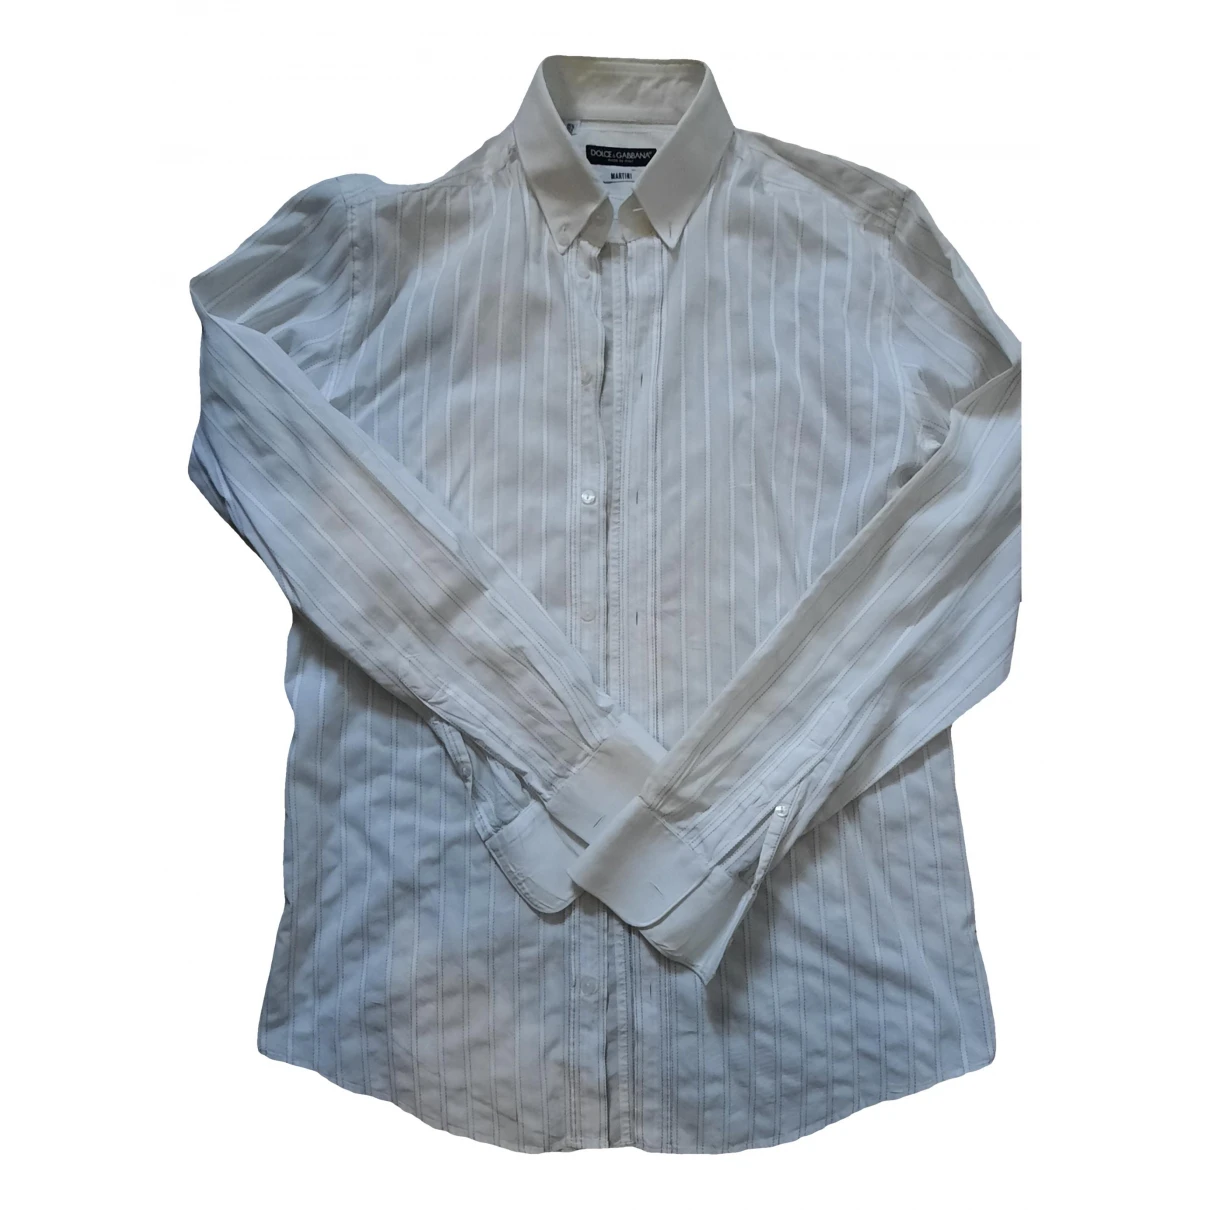 clothing Dolce & Gabbana shirts for Male Cotton M International. Used condition